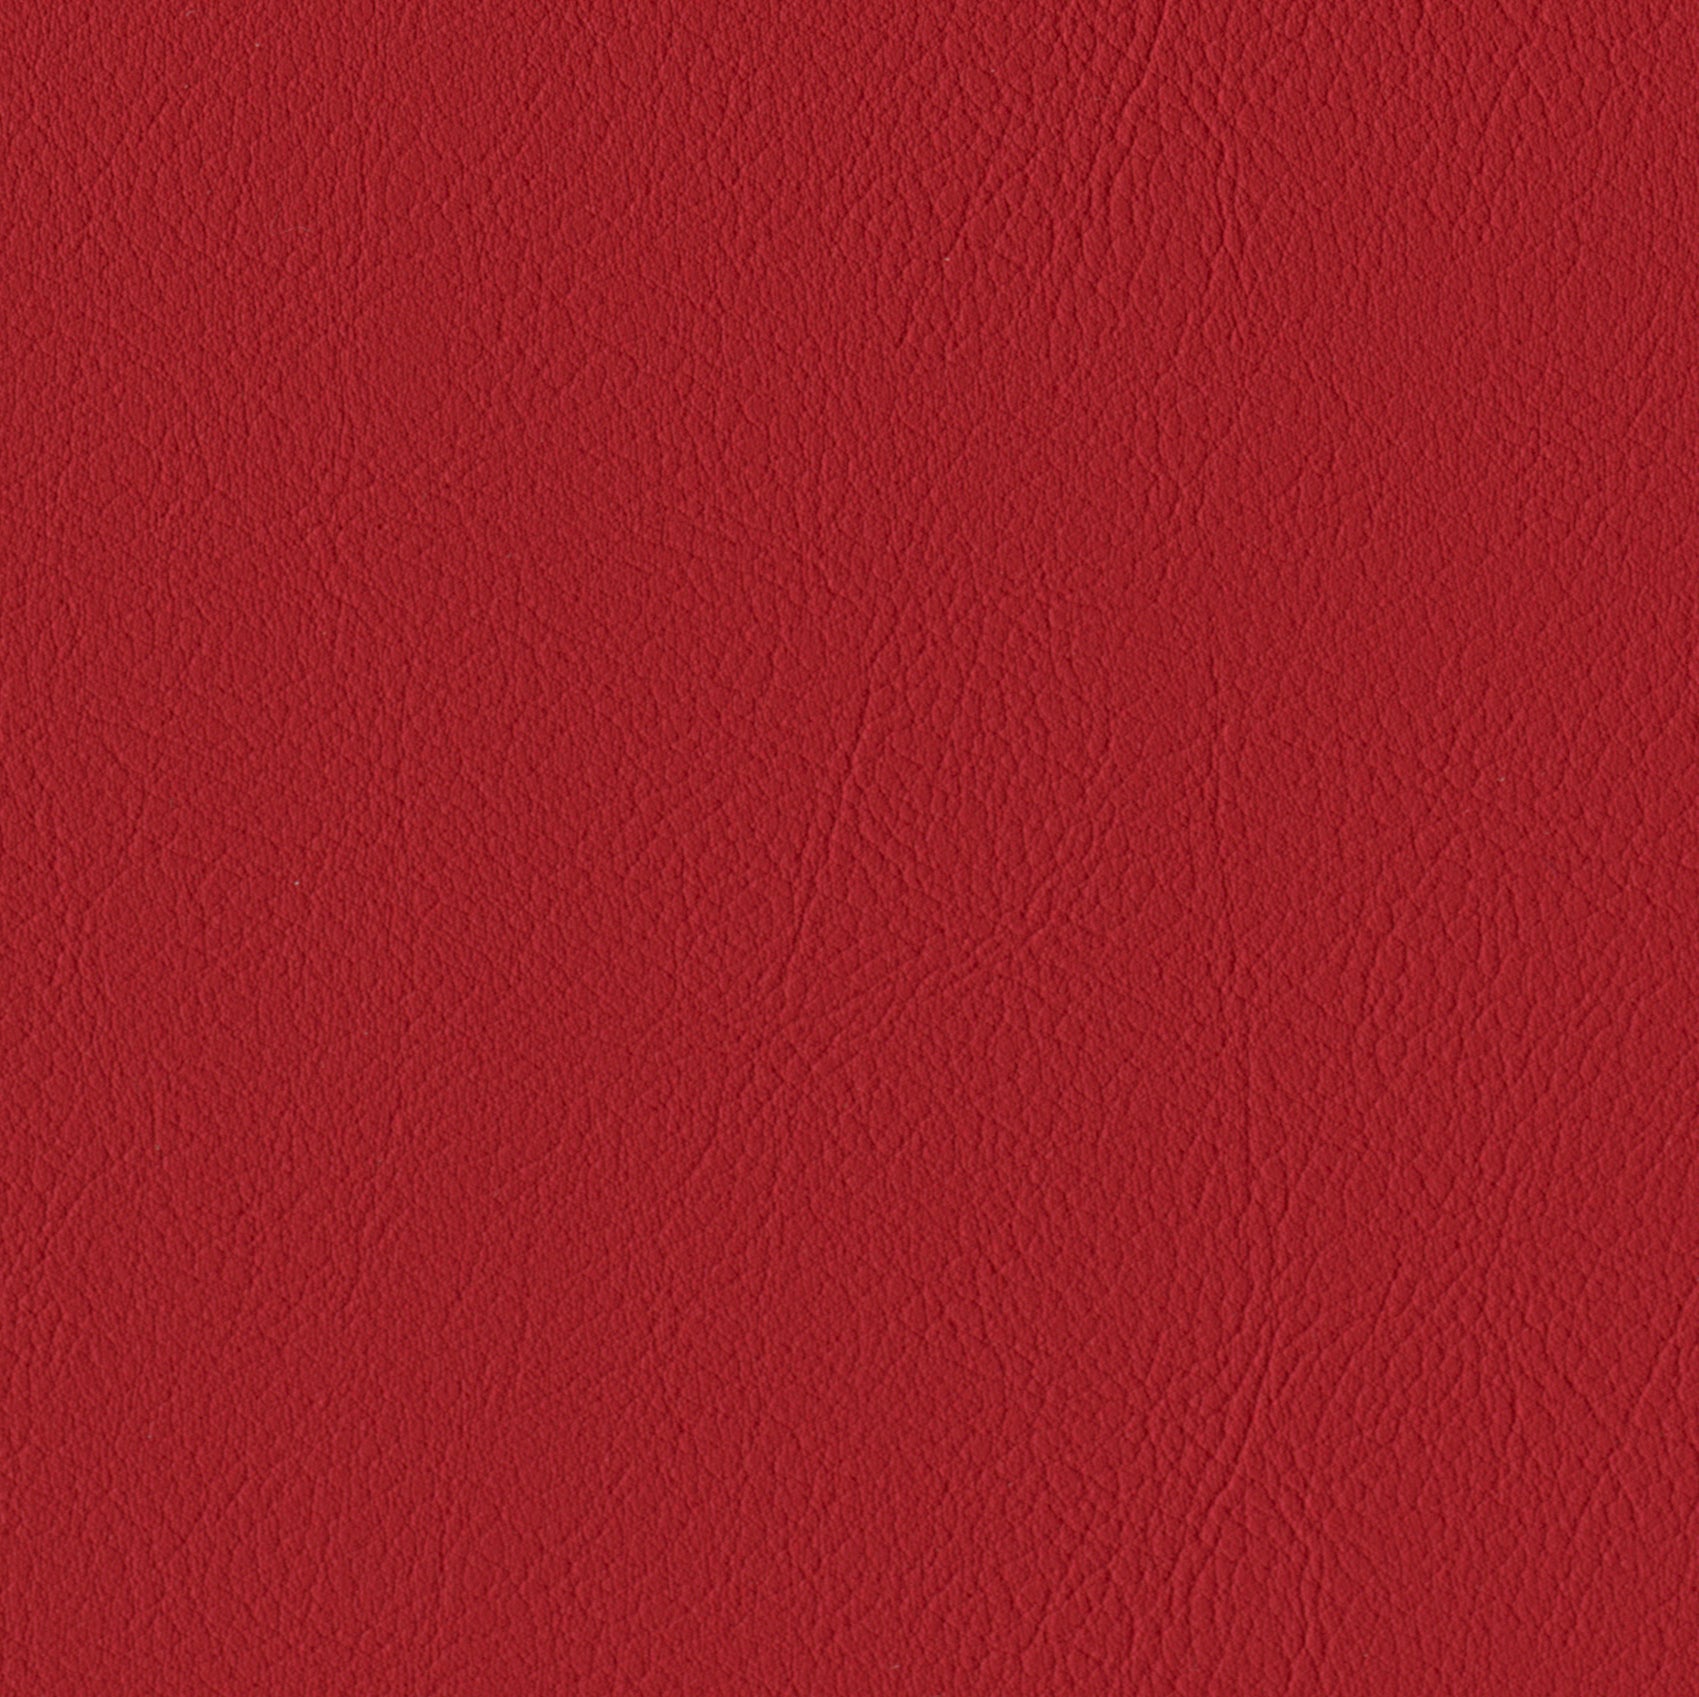    Andriali-Contract-Vinyl_Upholstery-Design-LegacyFR-Color-220Cherry-Width-140cm